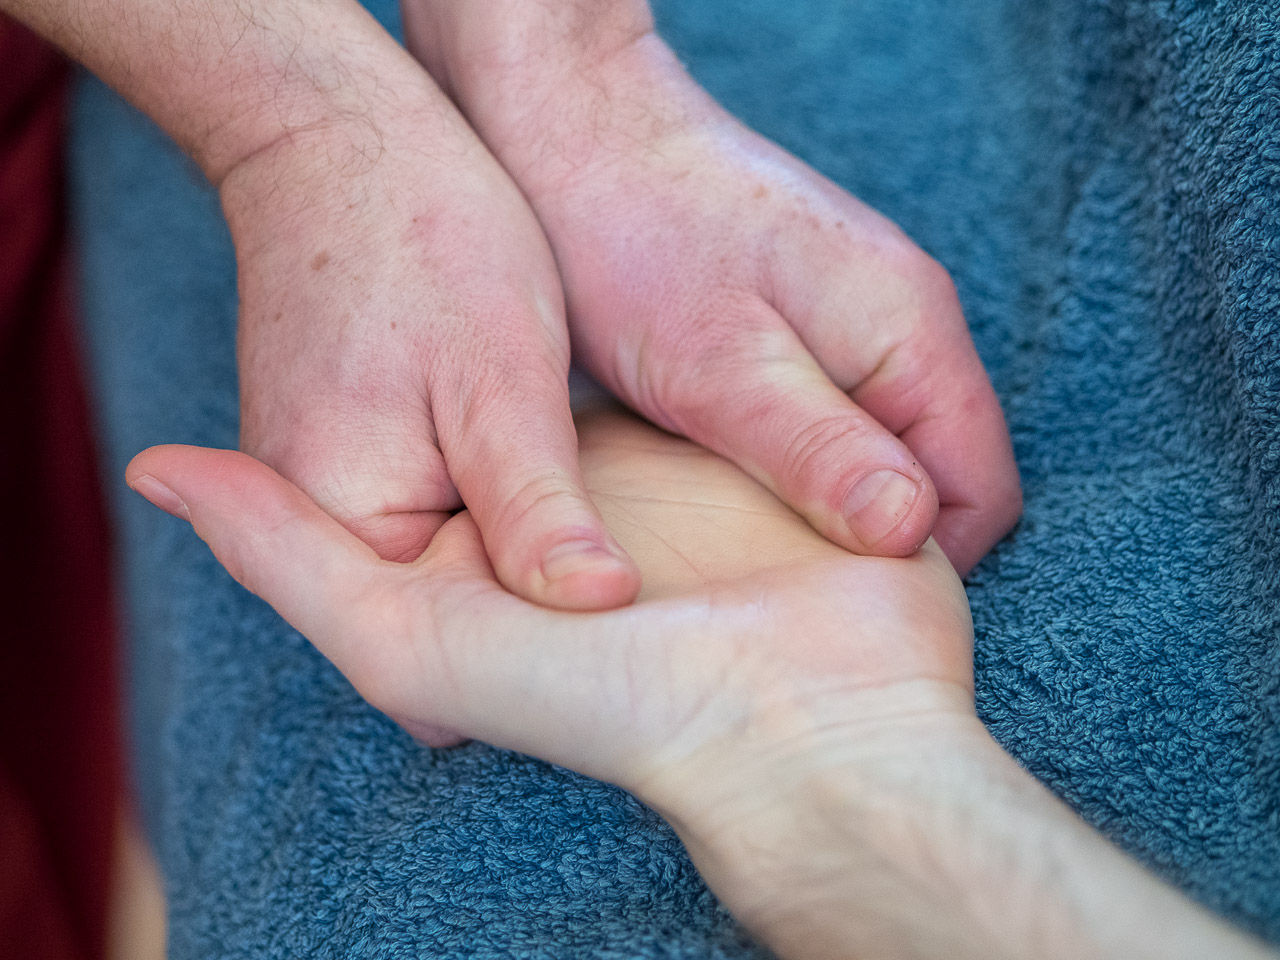 Well-being massage, men, hand massage, men. Hand massage quickly brings relief and well-being. Very simple to perform, it can be an ideal introduction for an elderly person or someone who is shy with touch.